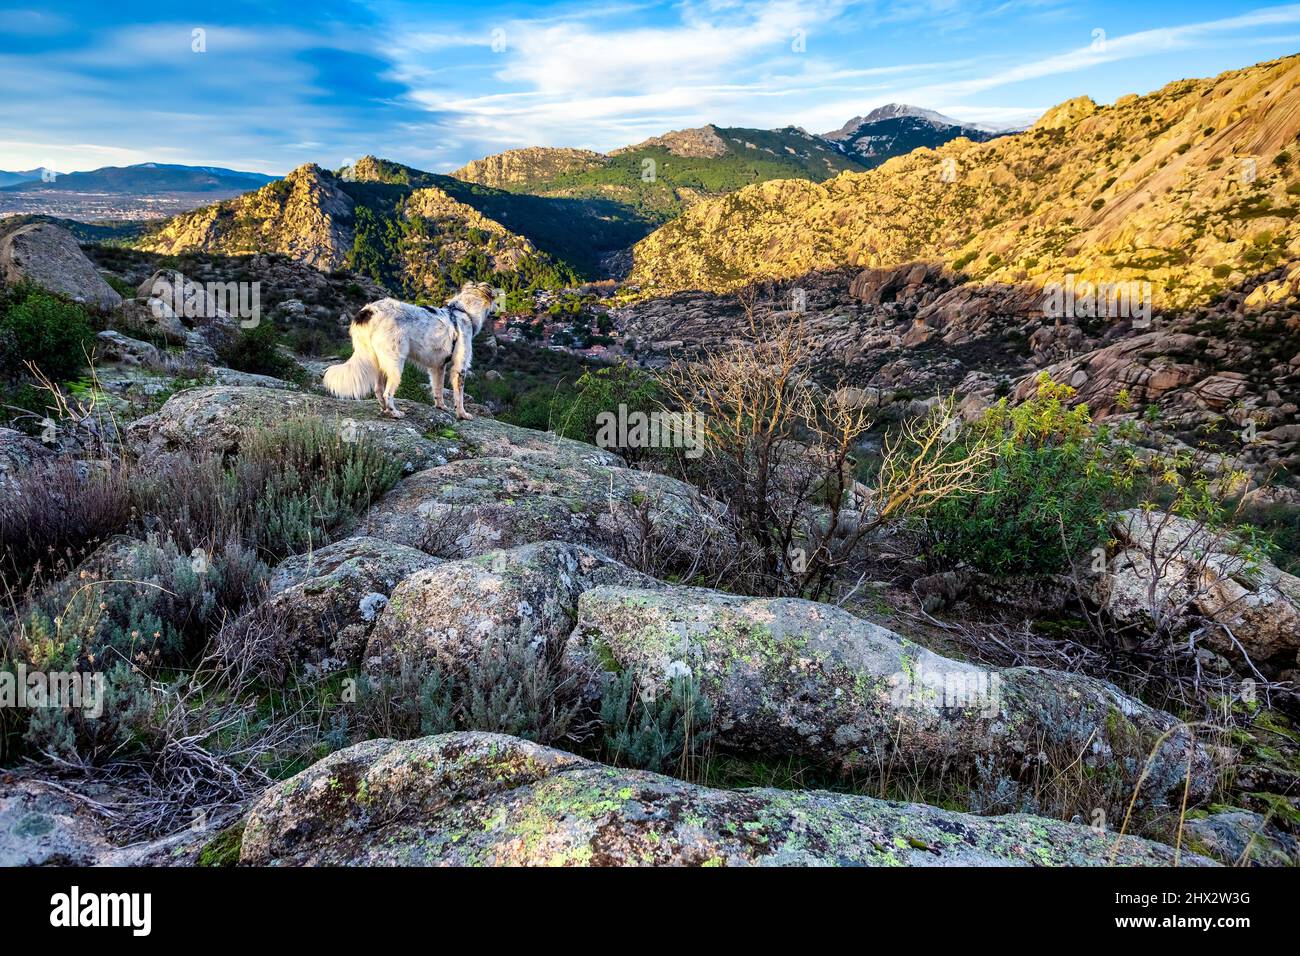 White dog on a rock watching the landscape of The Pedriza regional Park. Guadarrama Mountains. Madrid. Spain. Europe. Stock Photo